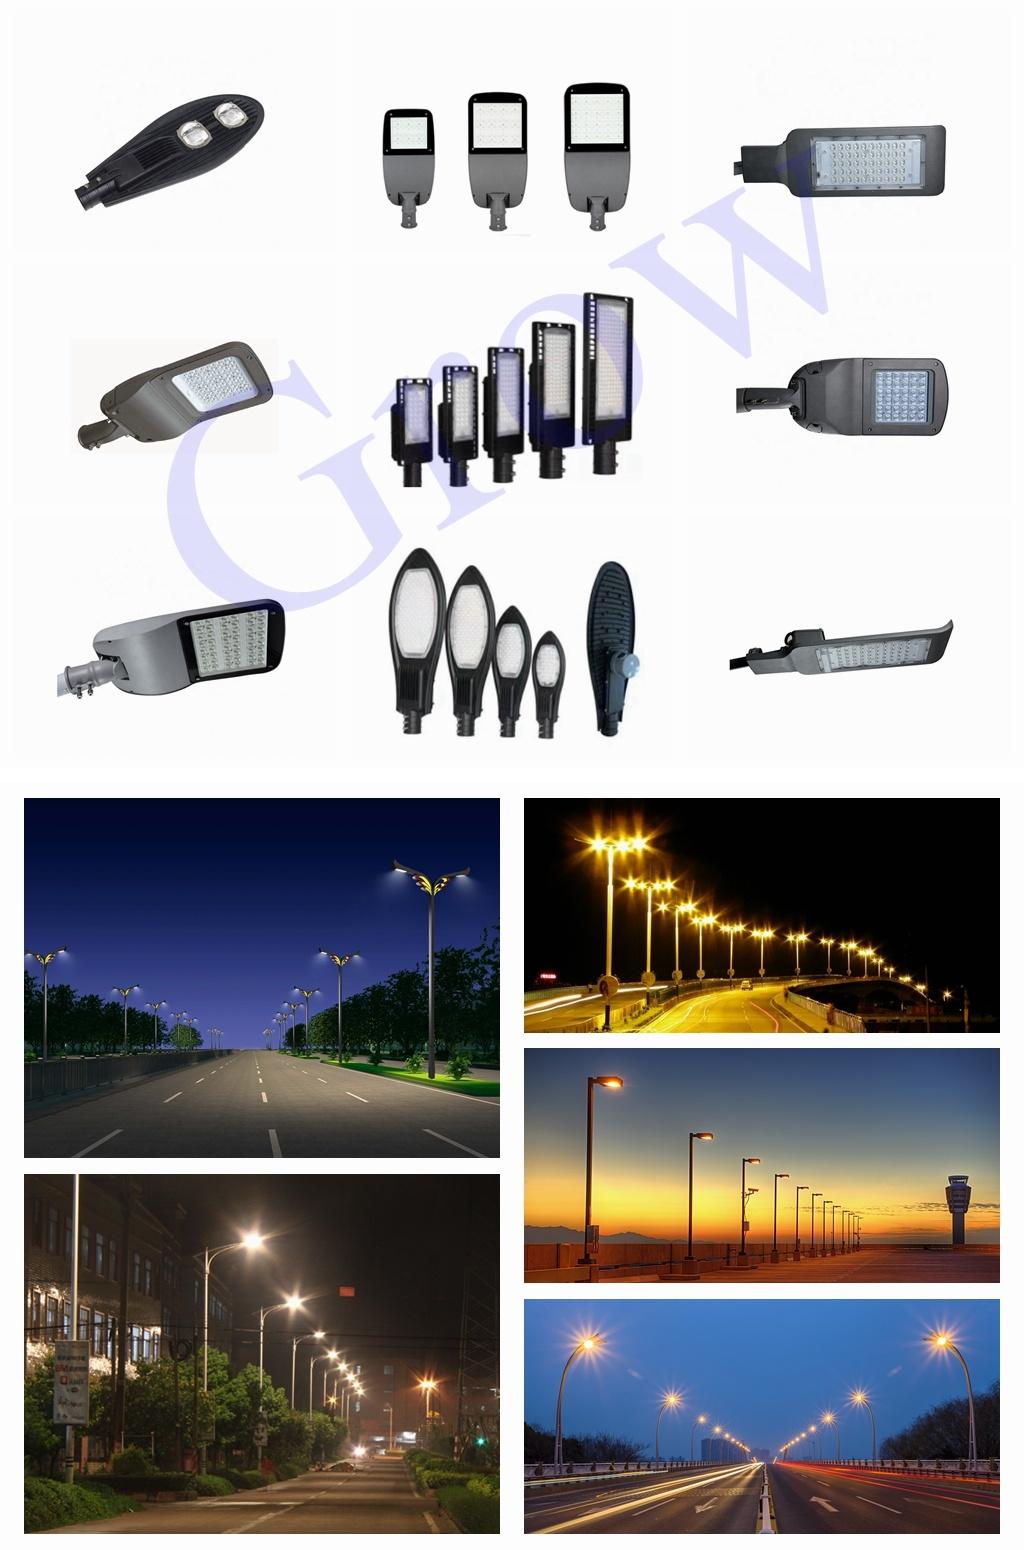 100W High Lumen Outdoor LED Street Light for Commercial or Residential Area Pathway Security Light with 5 Years Warranty